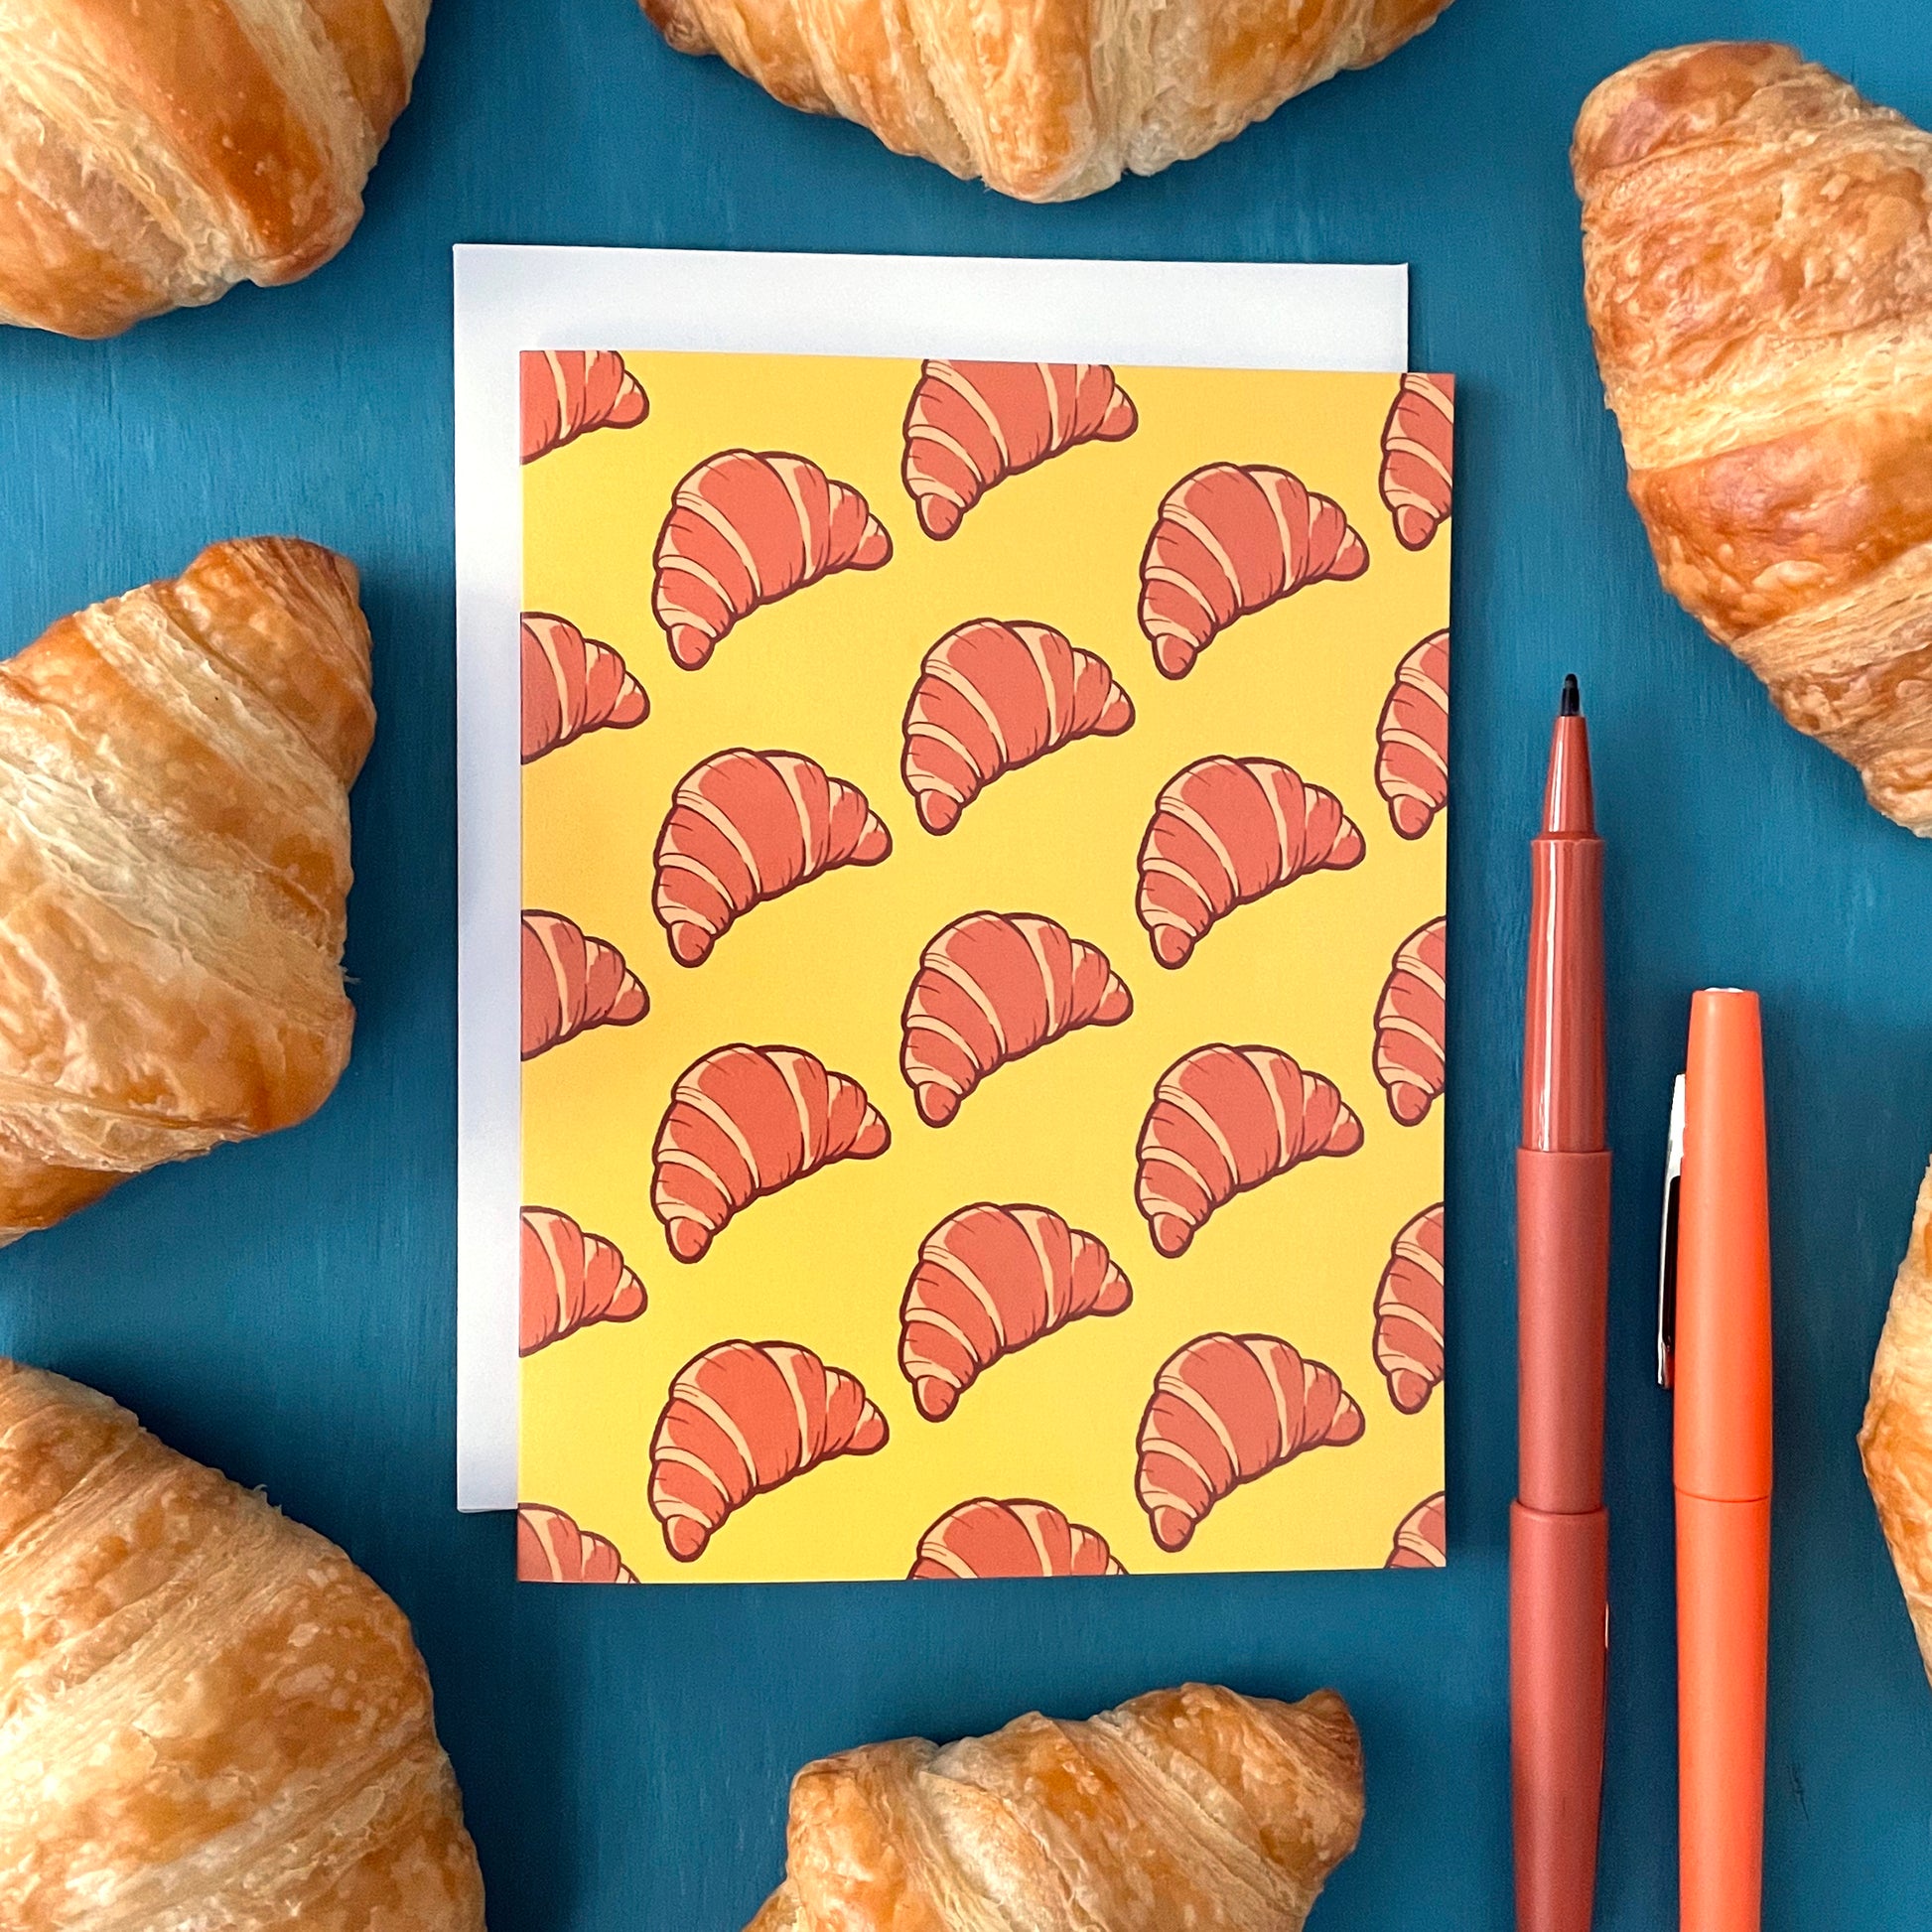 A yellow greeting card is patterned with drawings of croissants in diagonal lines. The card is surrounded by mini croissants and felt-tip pens on a blue background.